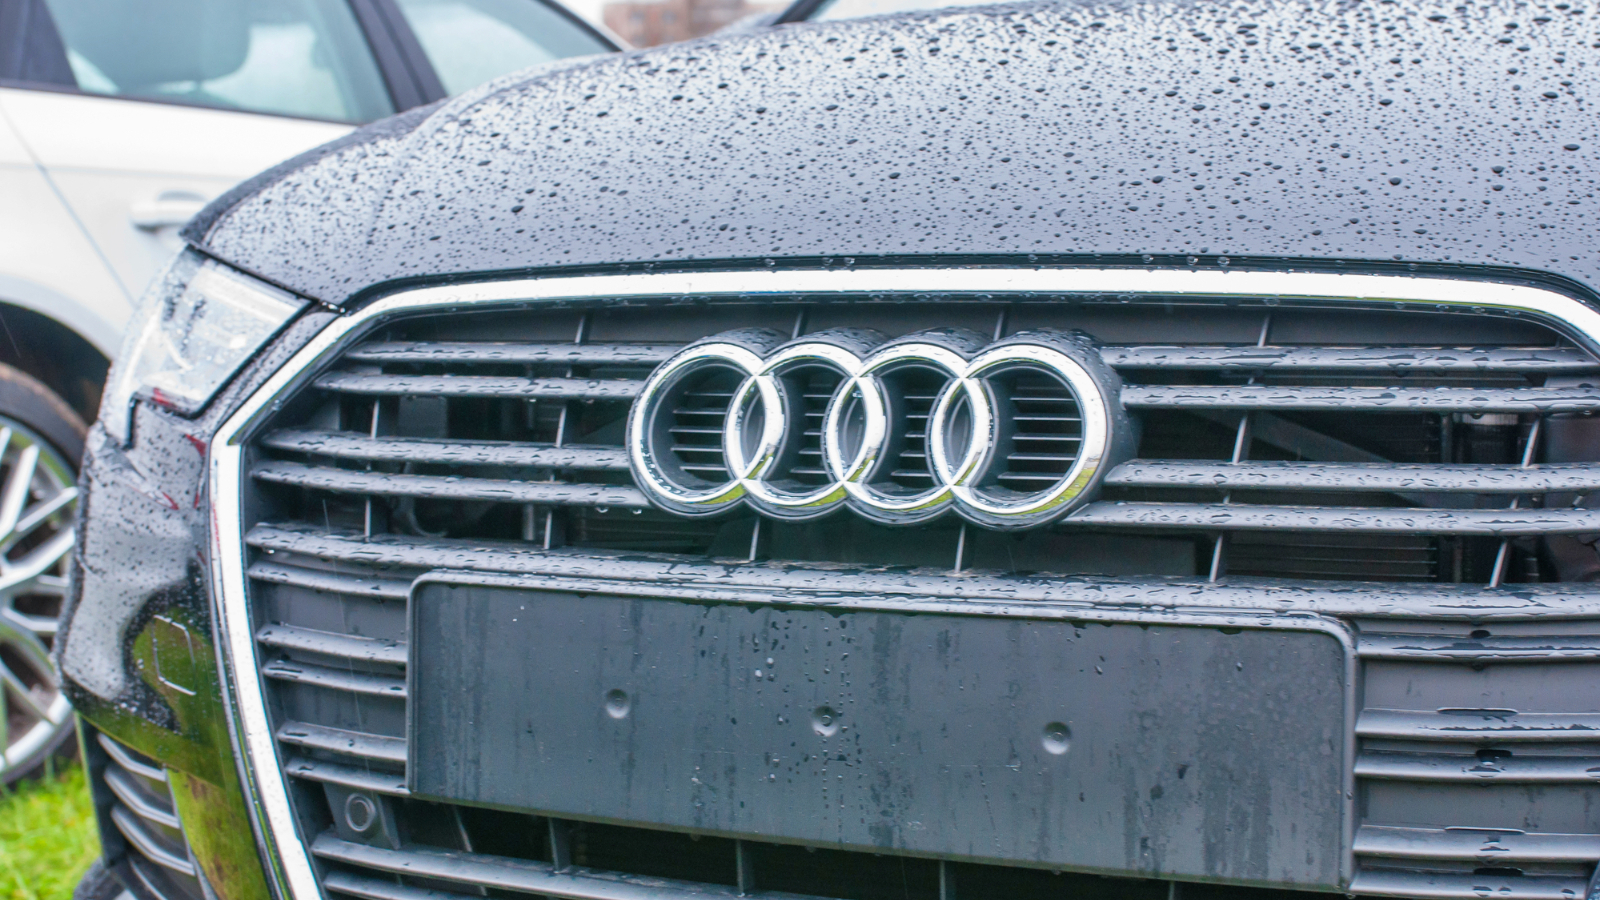 Certified Pre-Owned Service Protection > Audi Protection Plans